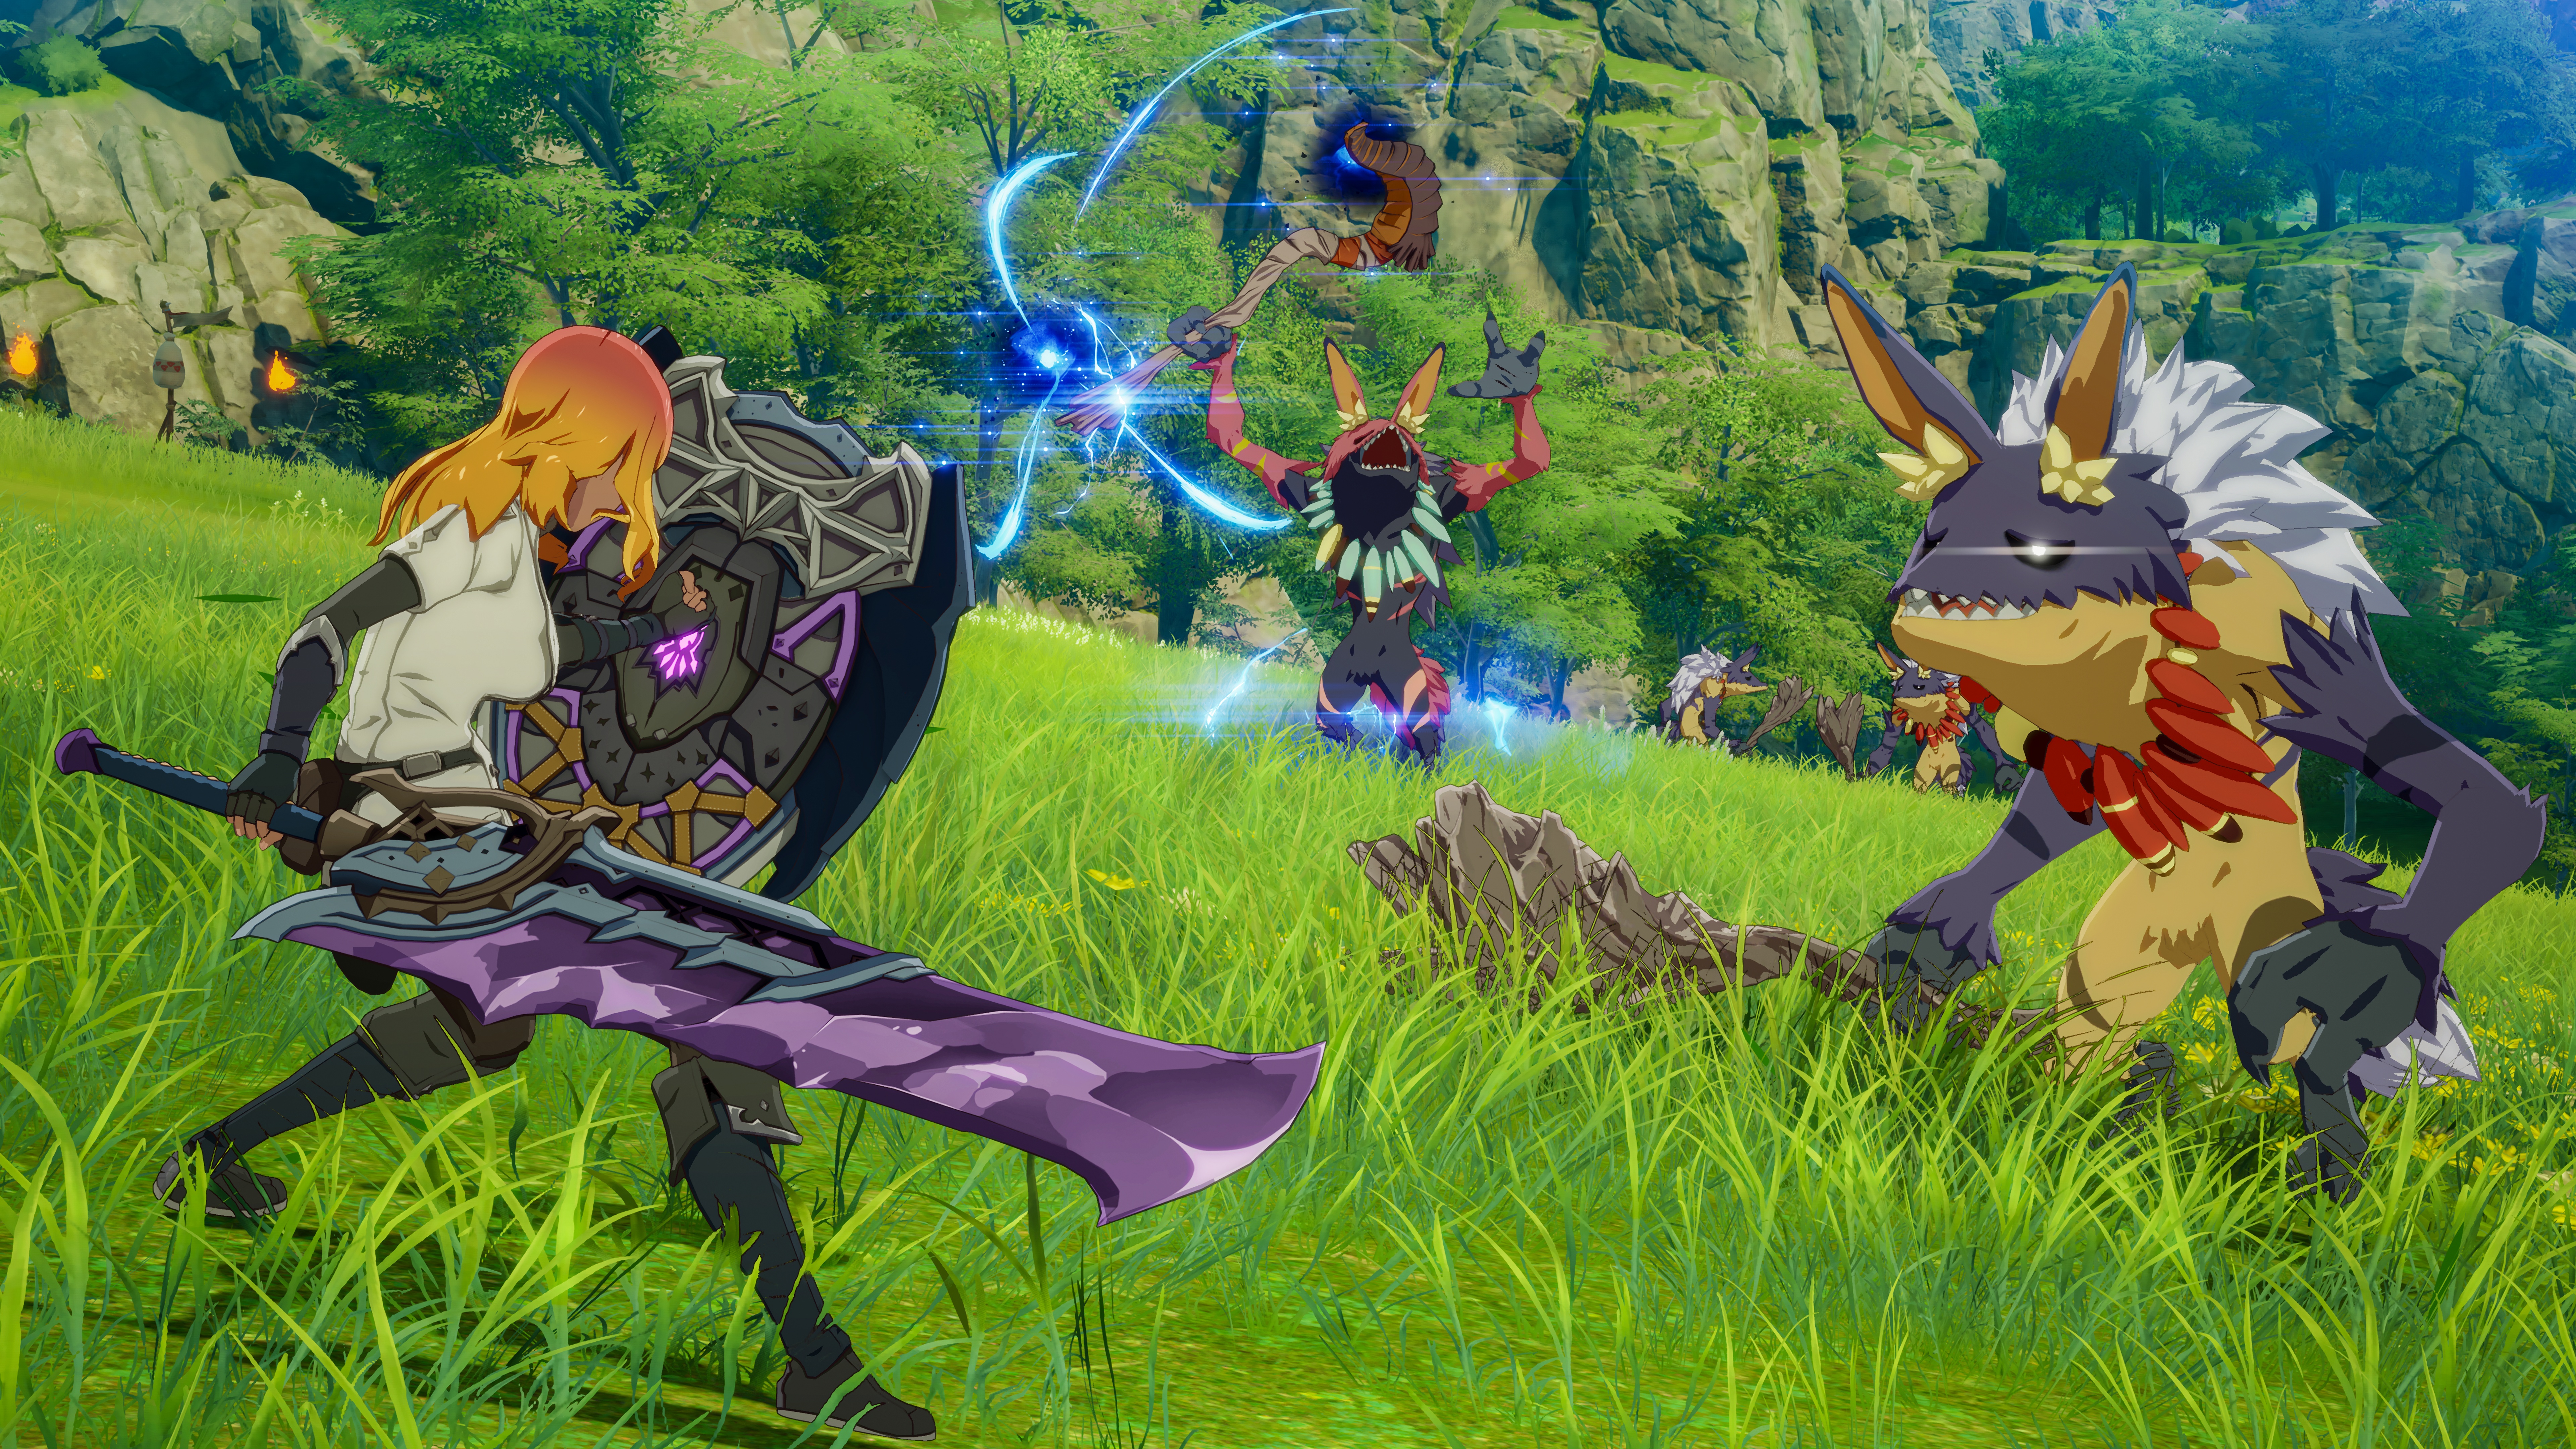 Blue Protocol is  and Bandai Namco's new action RPG, and